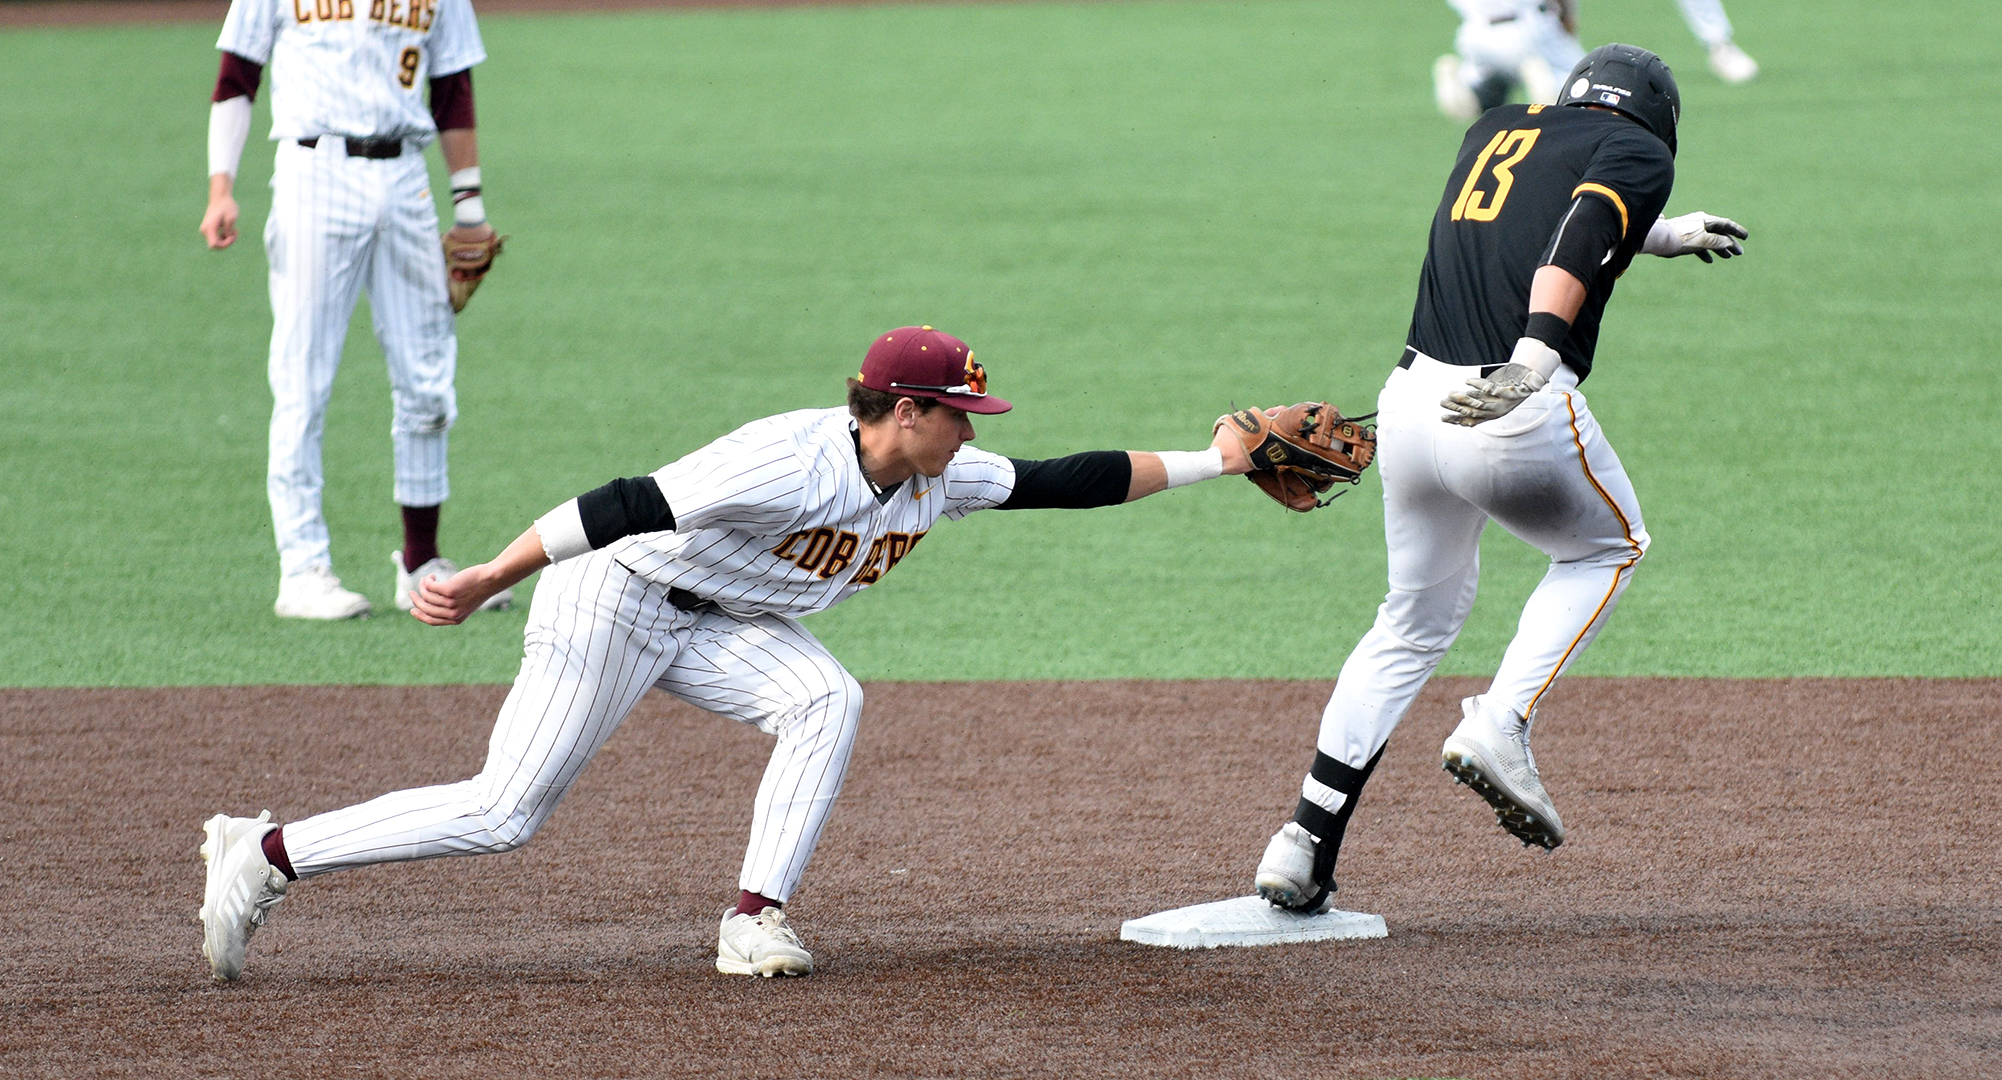 Jake Christianson lunges to put the tag on a Gustavus baserunner during the elimination game on Day 2 at the MIAC tournament.